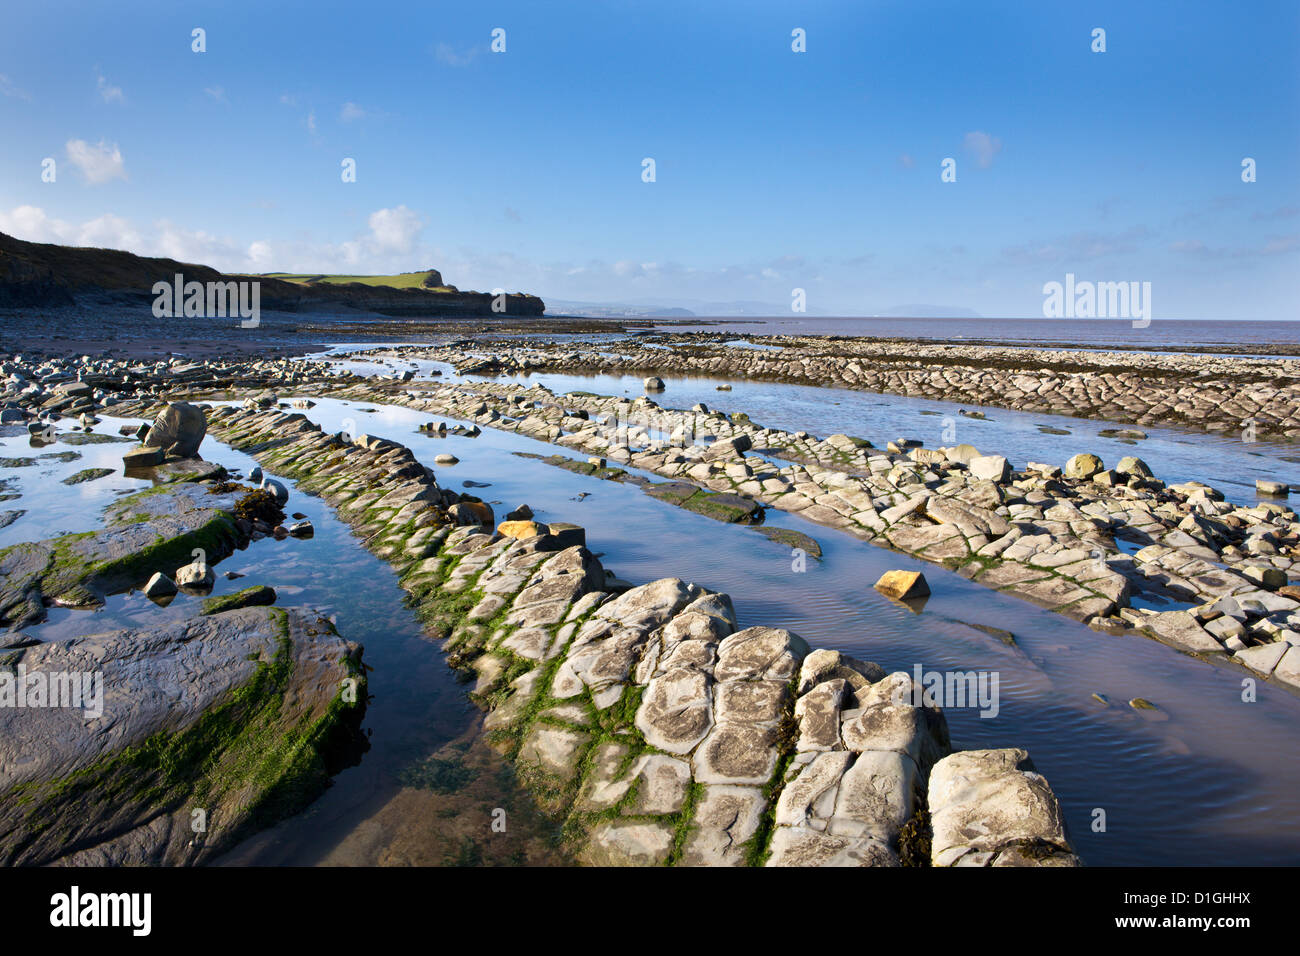 Limestone and shale rock formations on the shore at Kilve, Somerset, England, United Kingdom, Europe Stock Photo